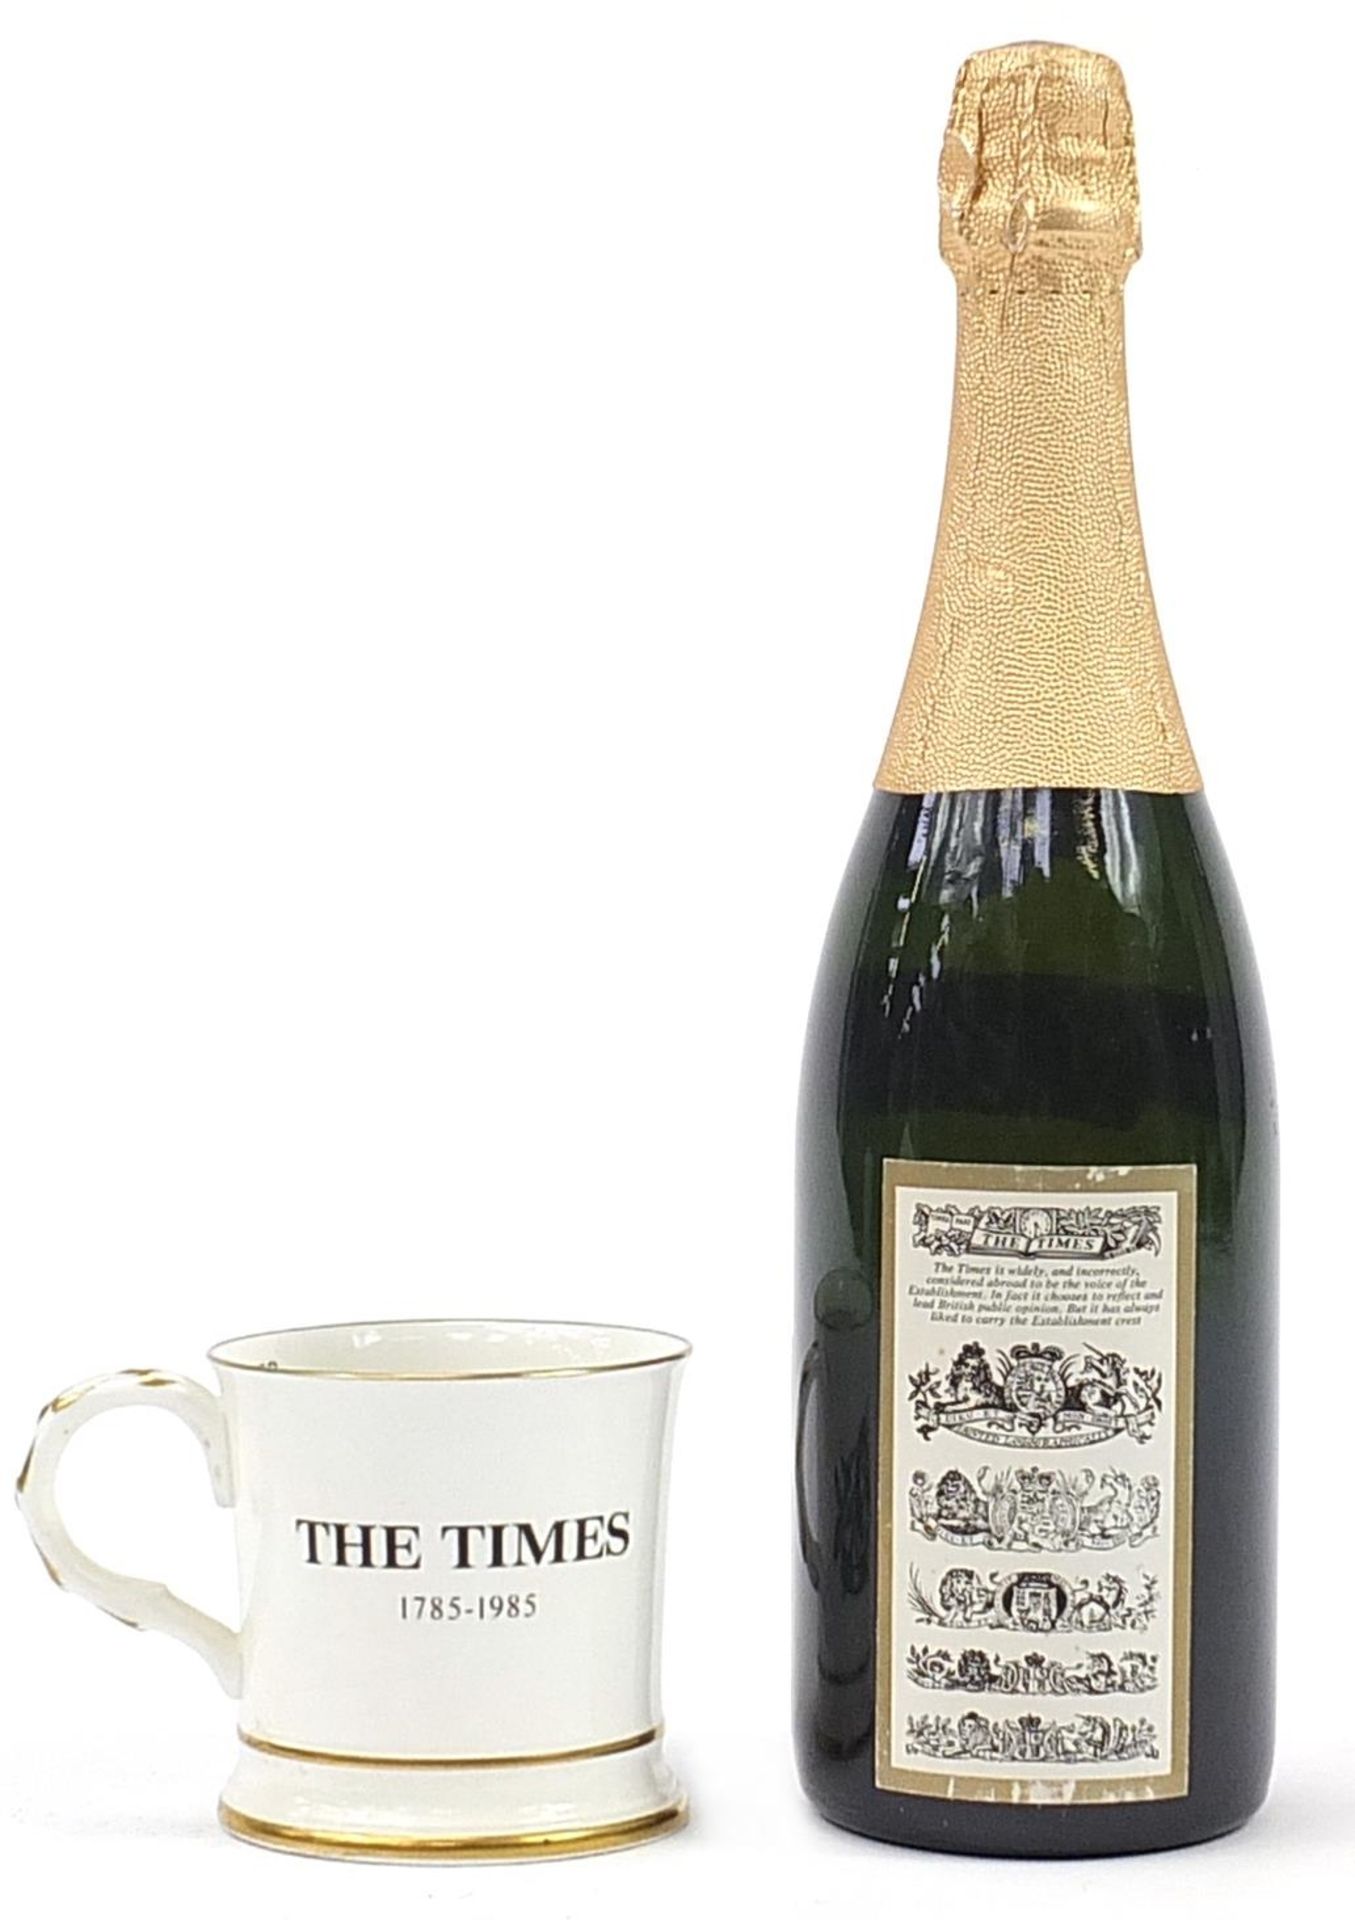 Bottle of Bollinger Champagne selected and shipped for The Times and a commemorative The Times - Image 2 of 3